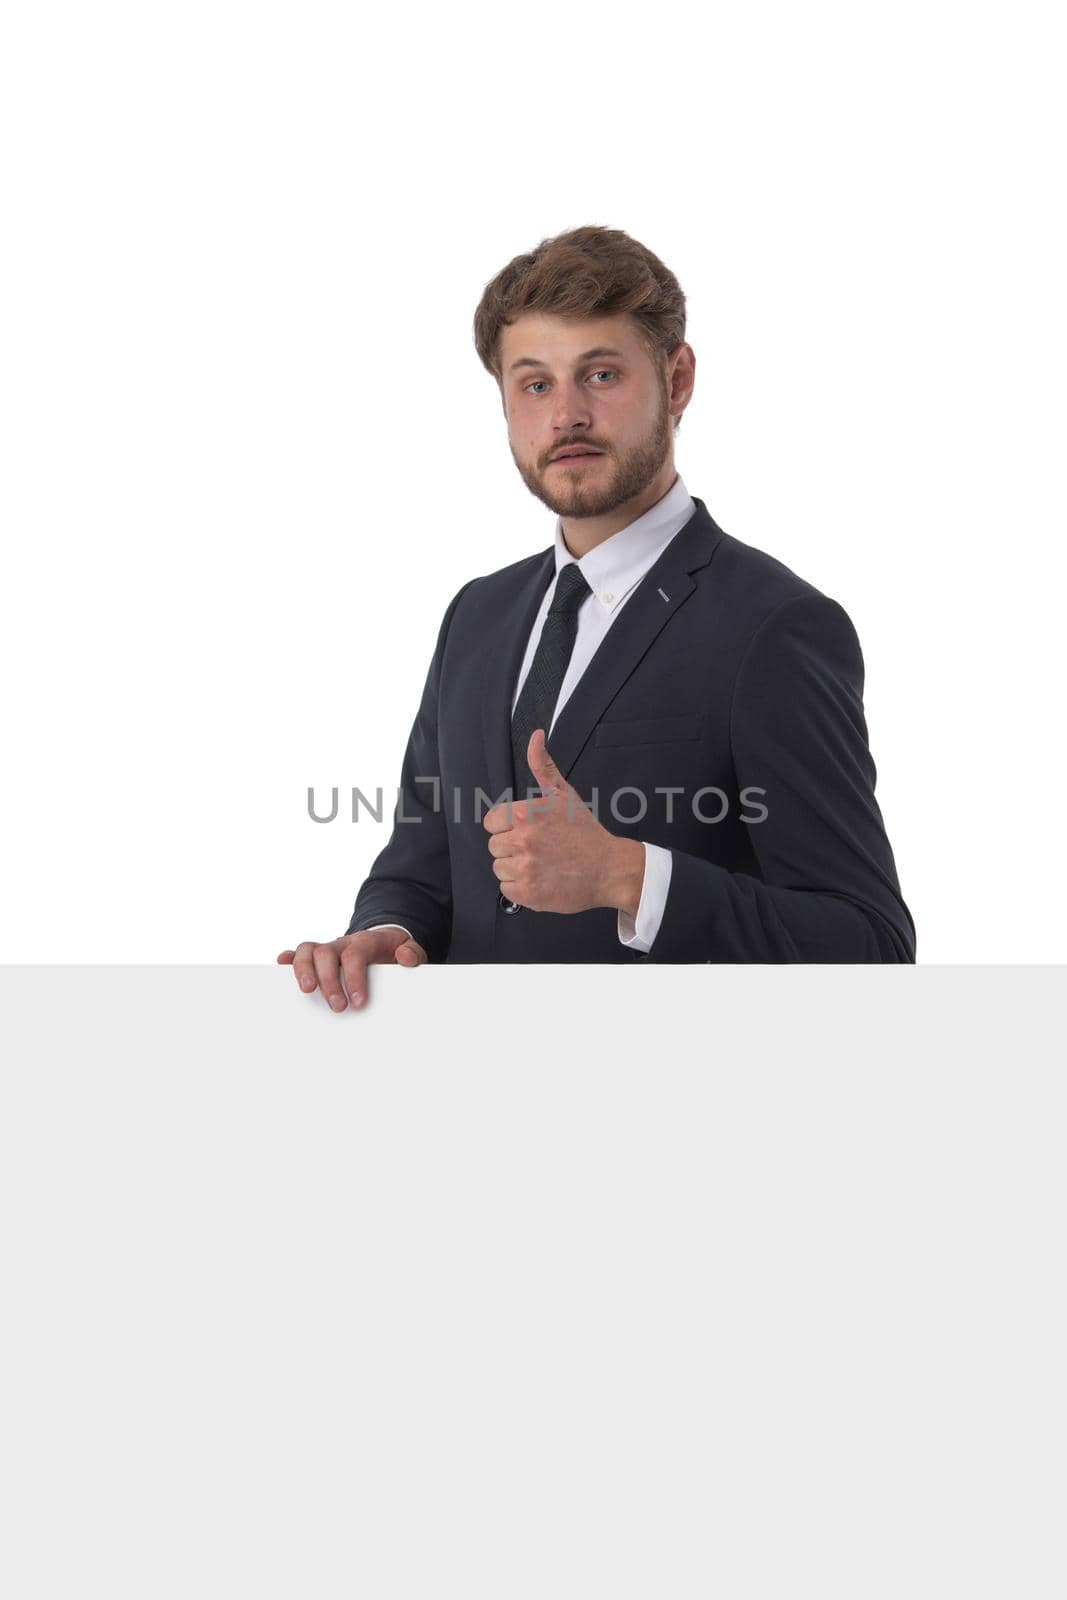 Business man displaying a banner ad isolated over a white background